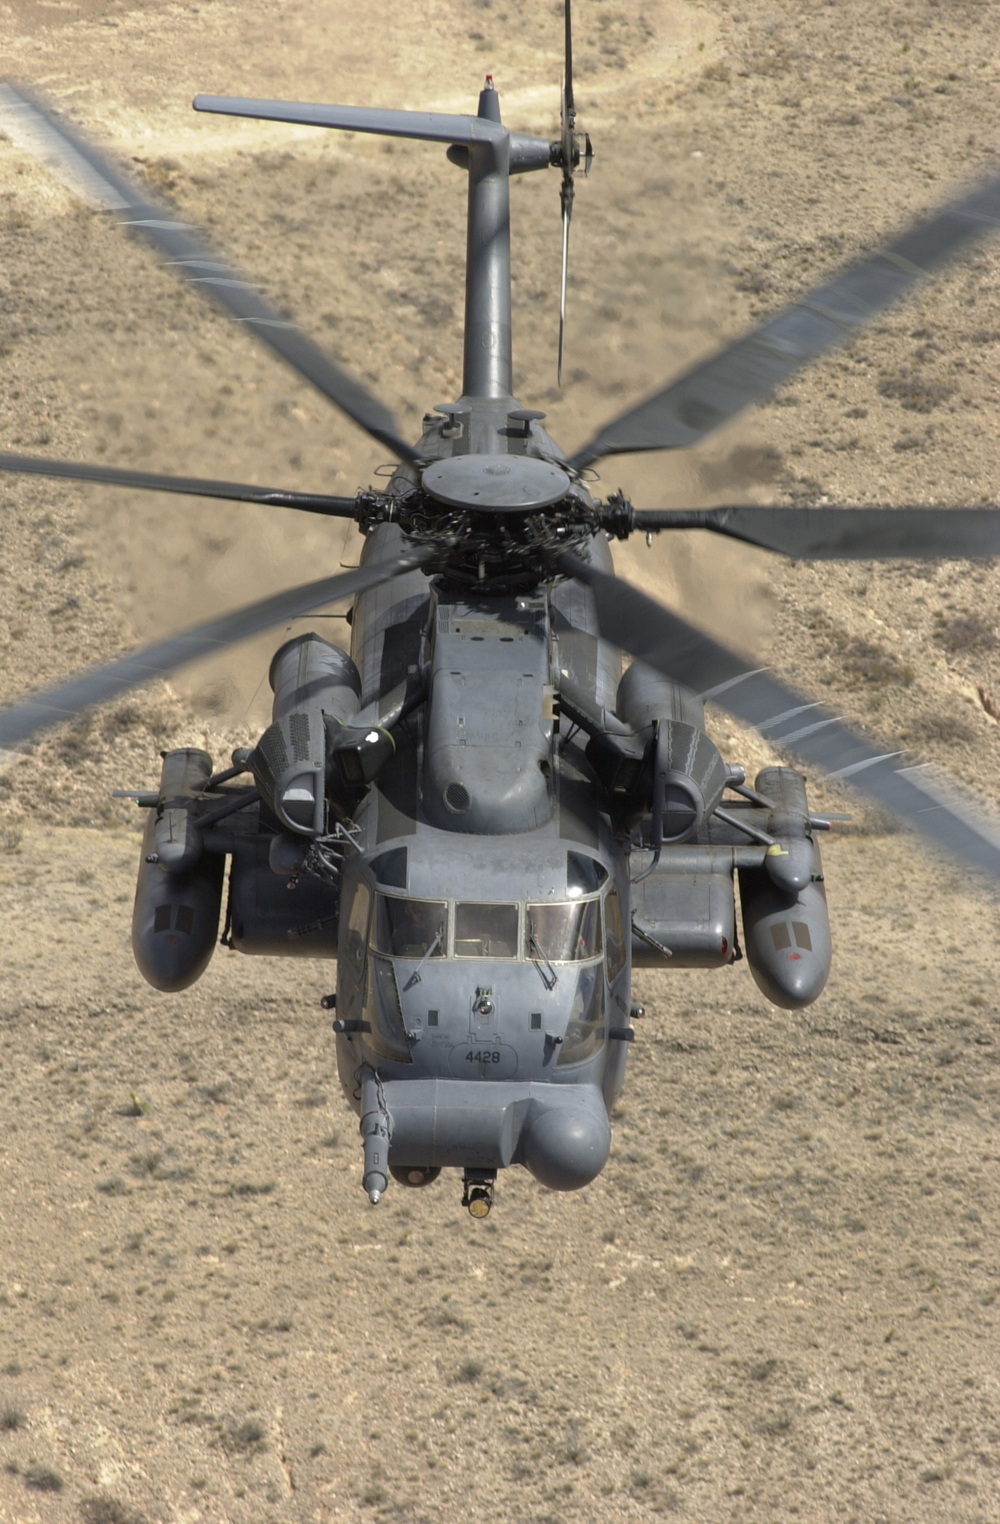 The first super Jolly Green Giant, 66-14428, now upgraded to an MH-53J Pave Low IIIE, assigned to the 551st Special operations Squadron, 58th Speciqal operations Wing, in flight near Kirtland Air Force Base, New Mexico, 24 March 2000. (U.S. Air Force)